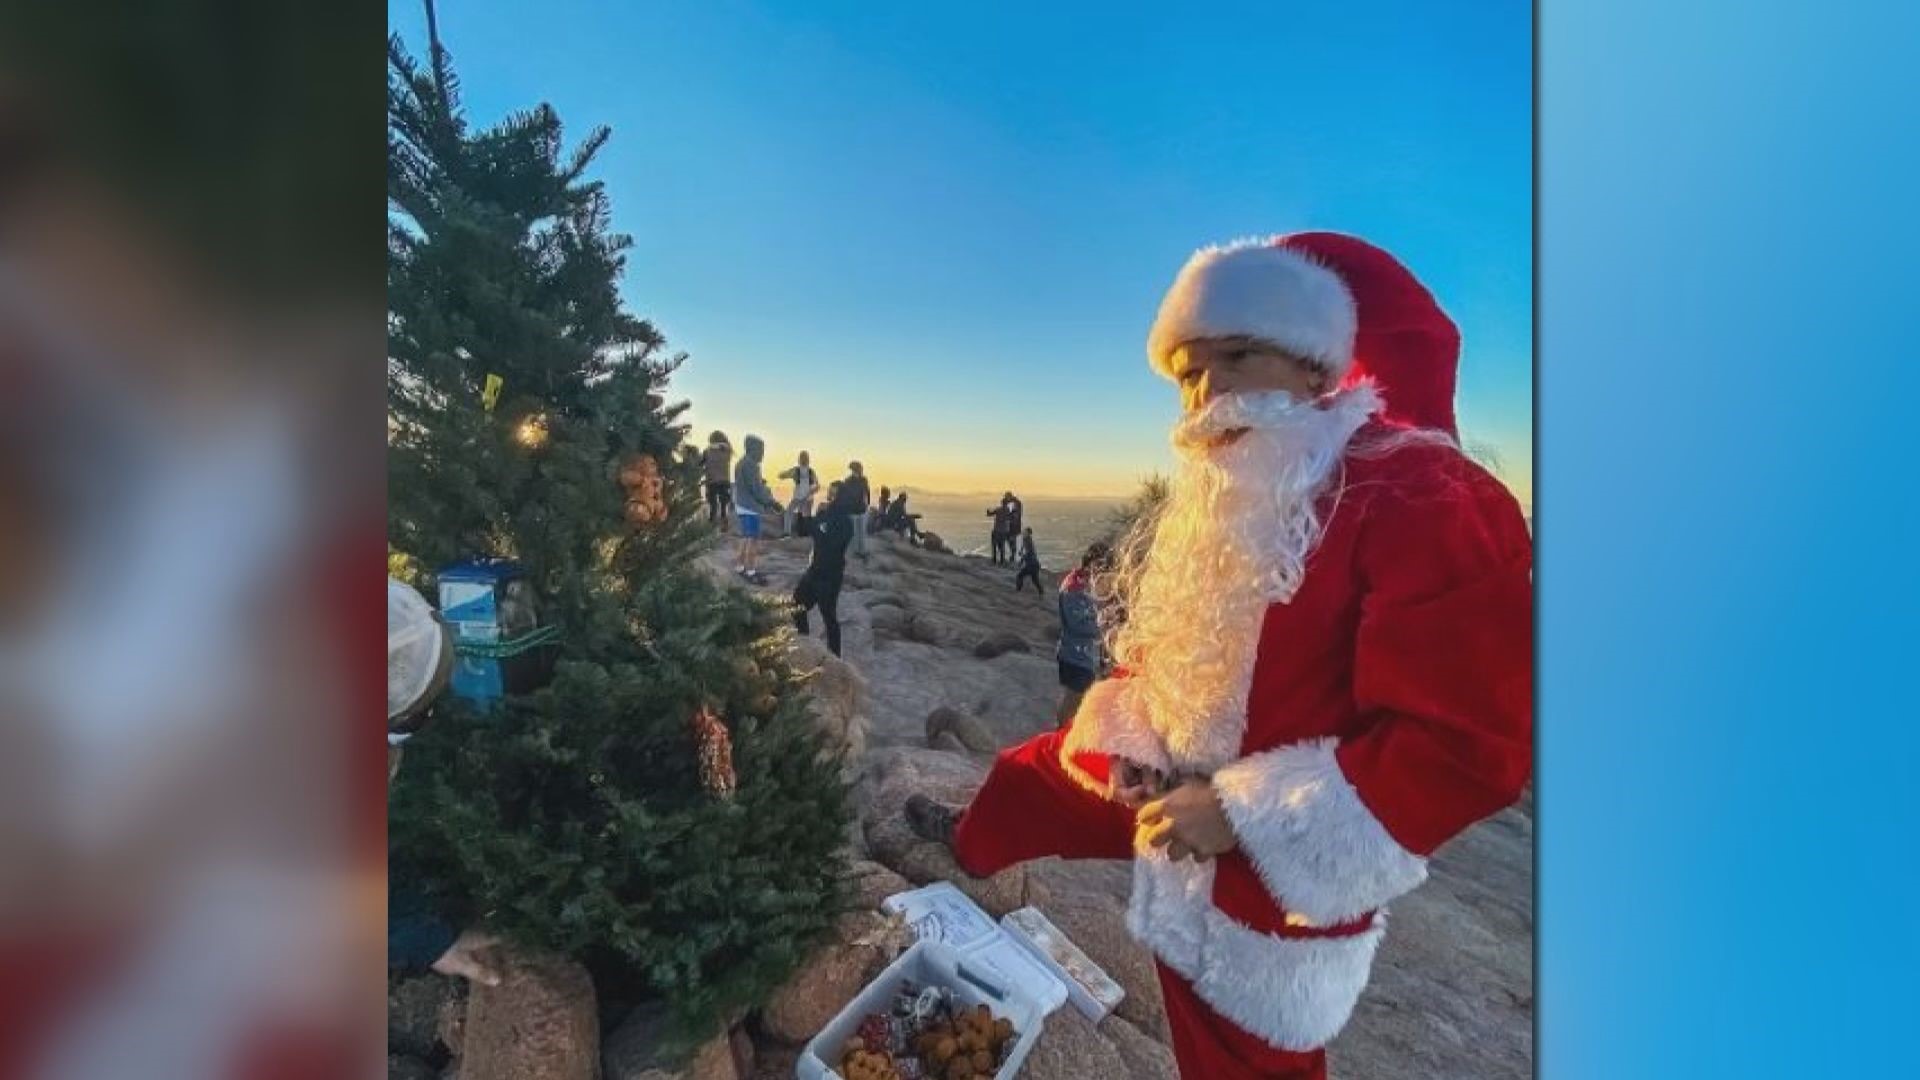 A Christmas tradition unique to Phoenix is the Christmas tree on top of Camelback Mountain. Despite the pandemic, Camelback Santa made sure the tradition lives on.